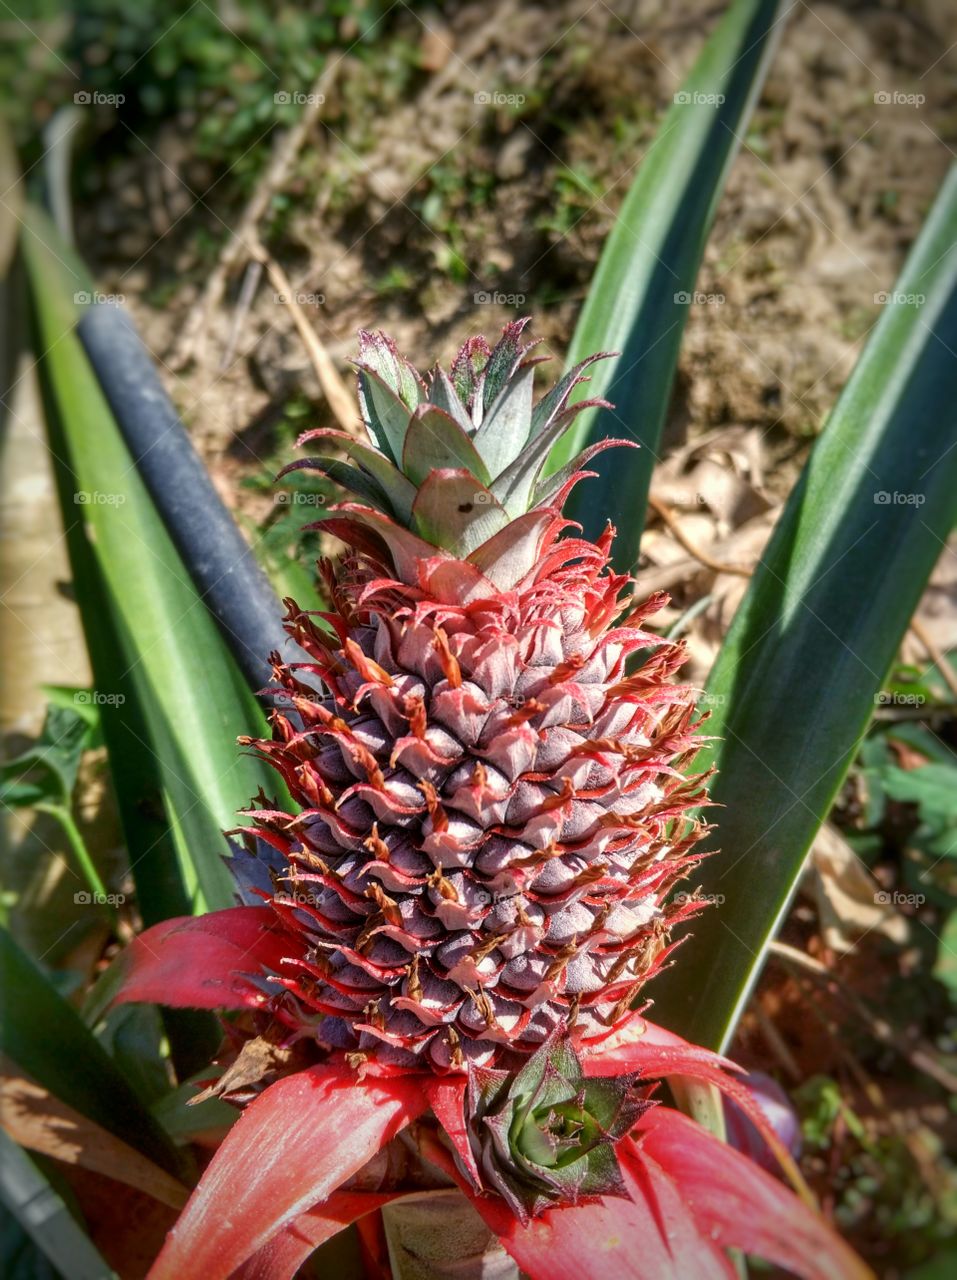 young pineapple on its parent plant